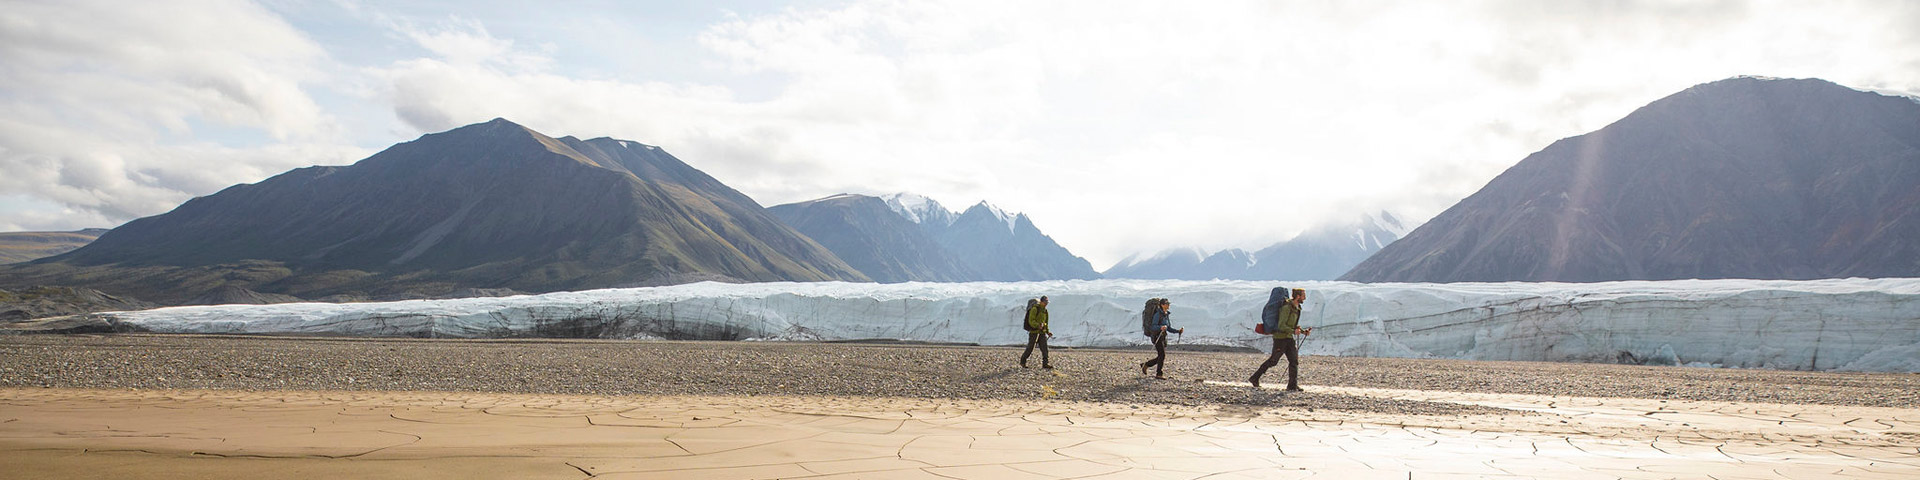 Hikers walk in front of the Donjek Glacier